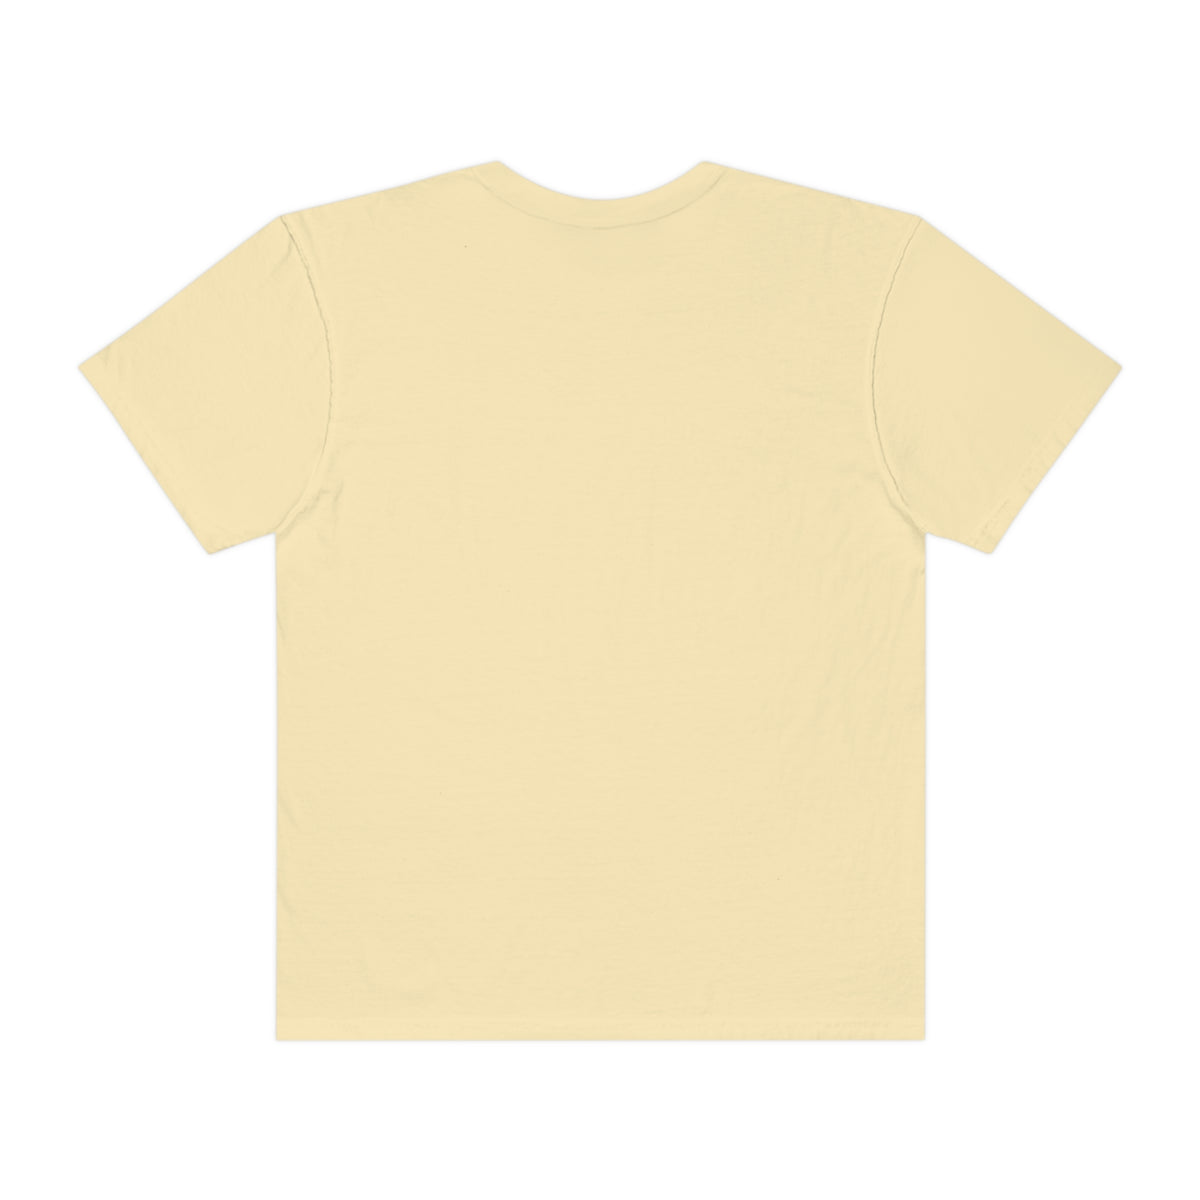 Hands of Dogs Garment-Dyed T-shirt